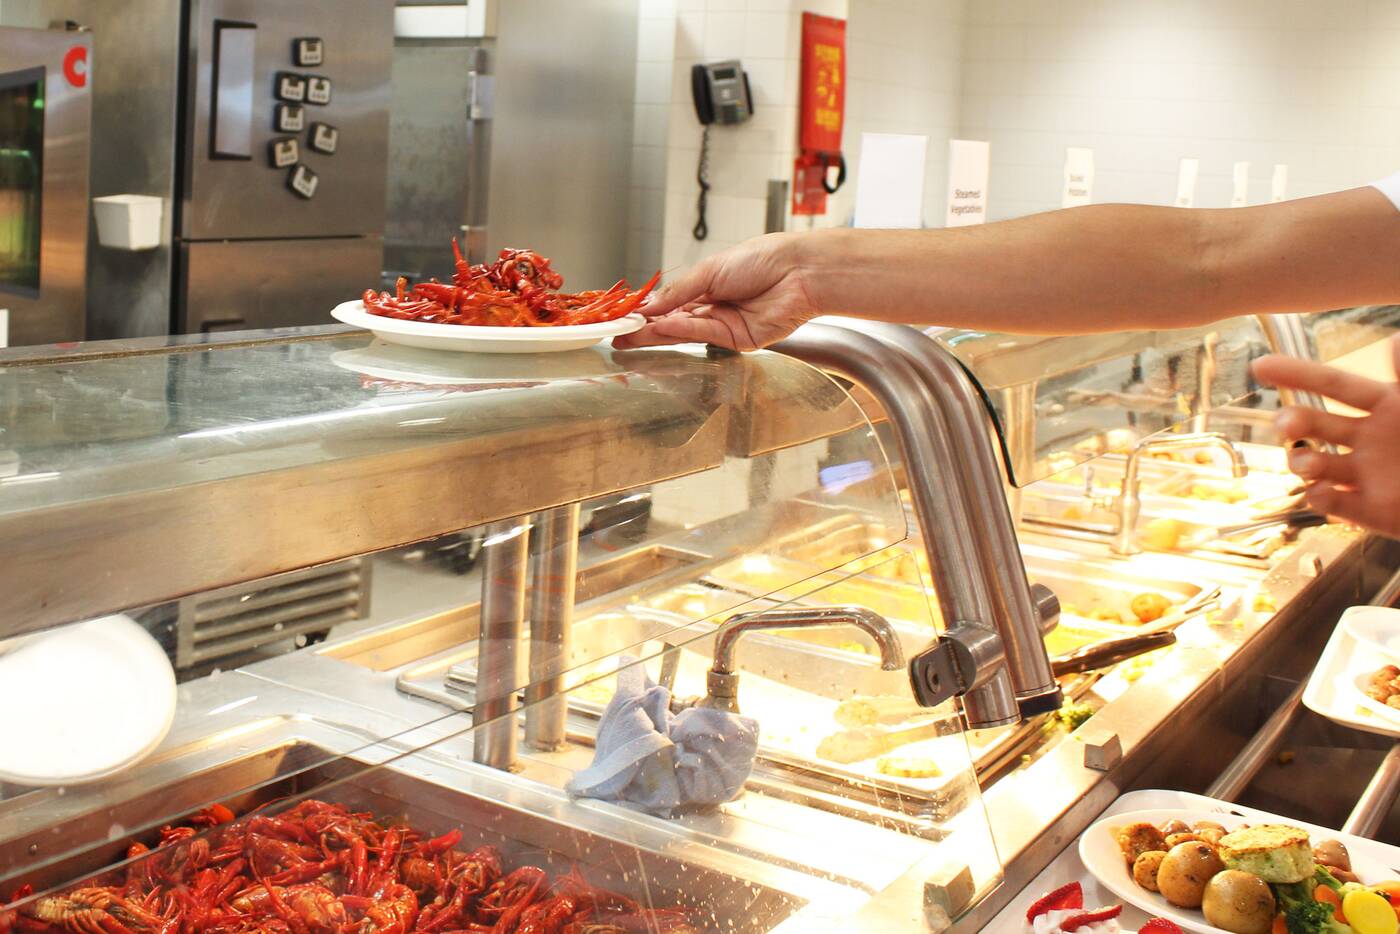 Hundreds flooded IKEA in Toronto for a massive crayfish buffet